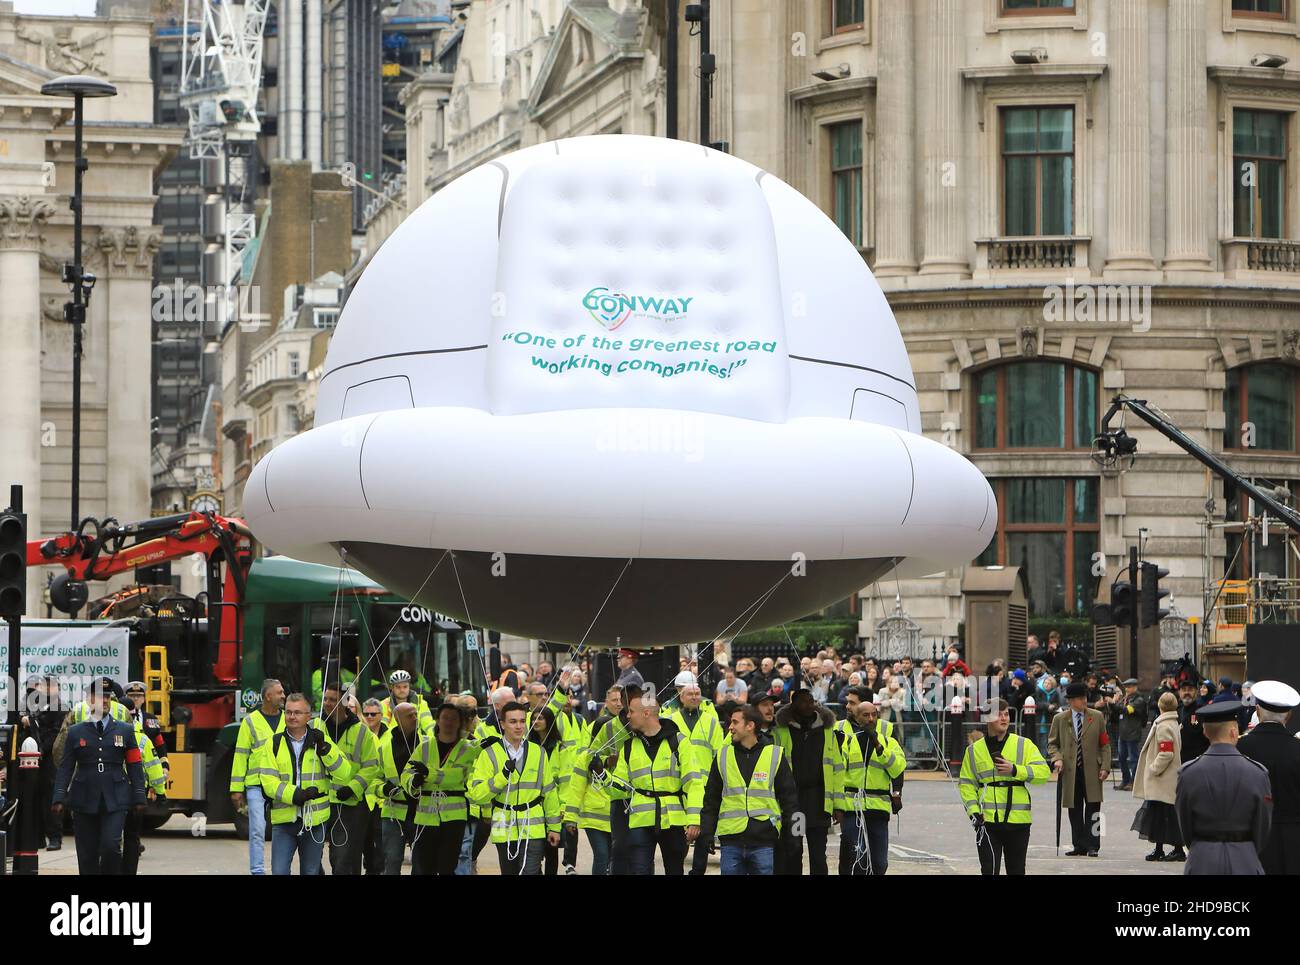 Conway, green road working company, taking part in the Lord Mayor's Show 2021, in the heart of the City of London, UK Stock Photo